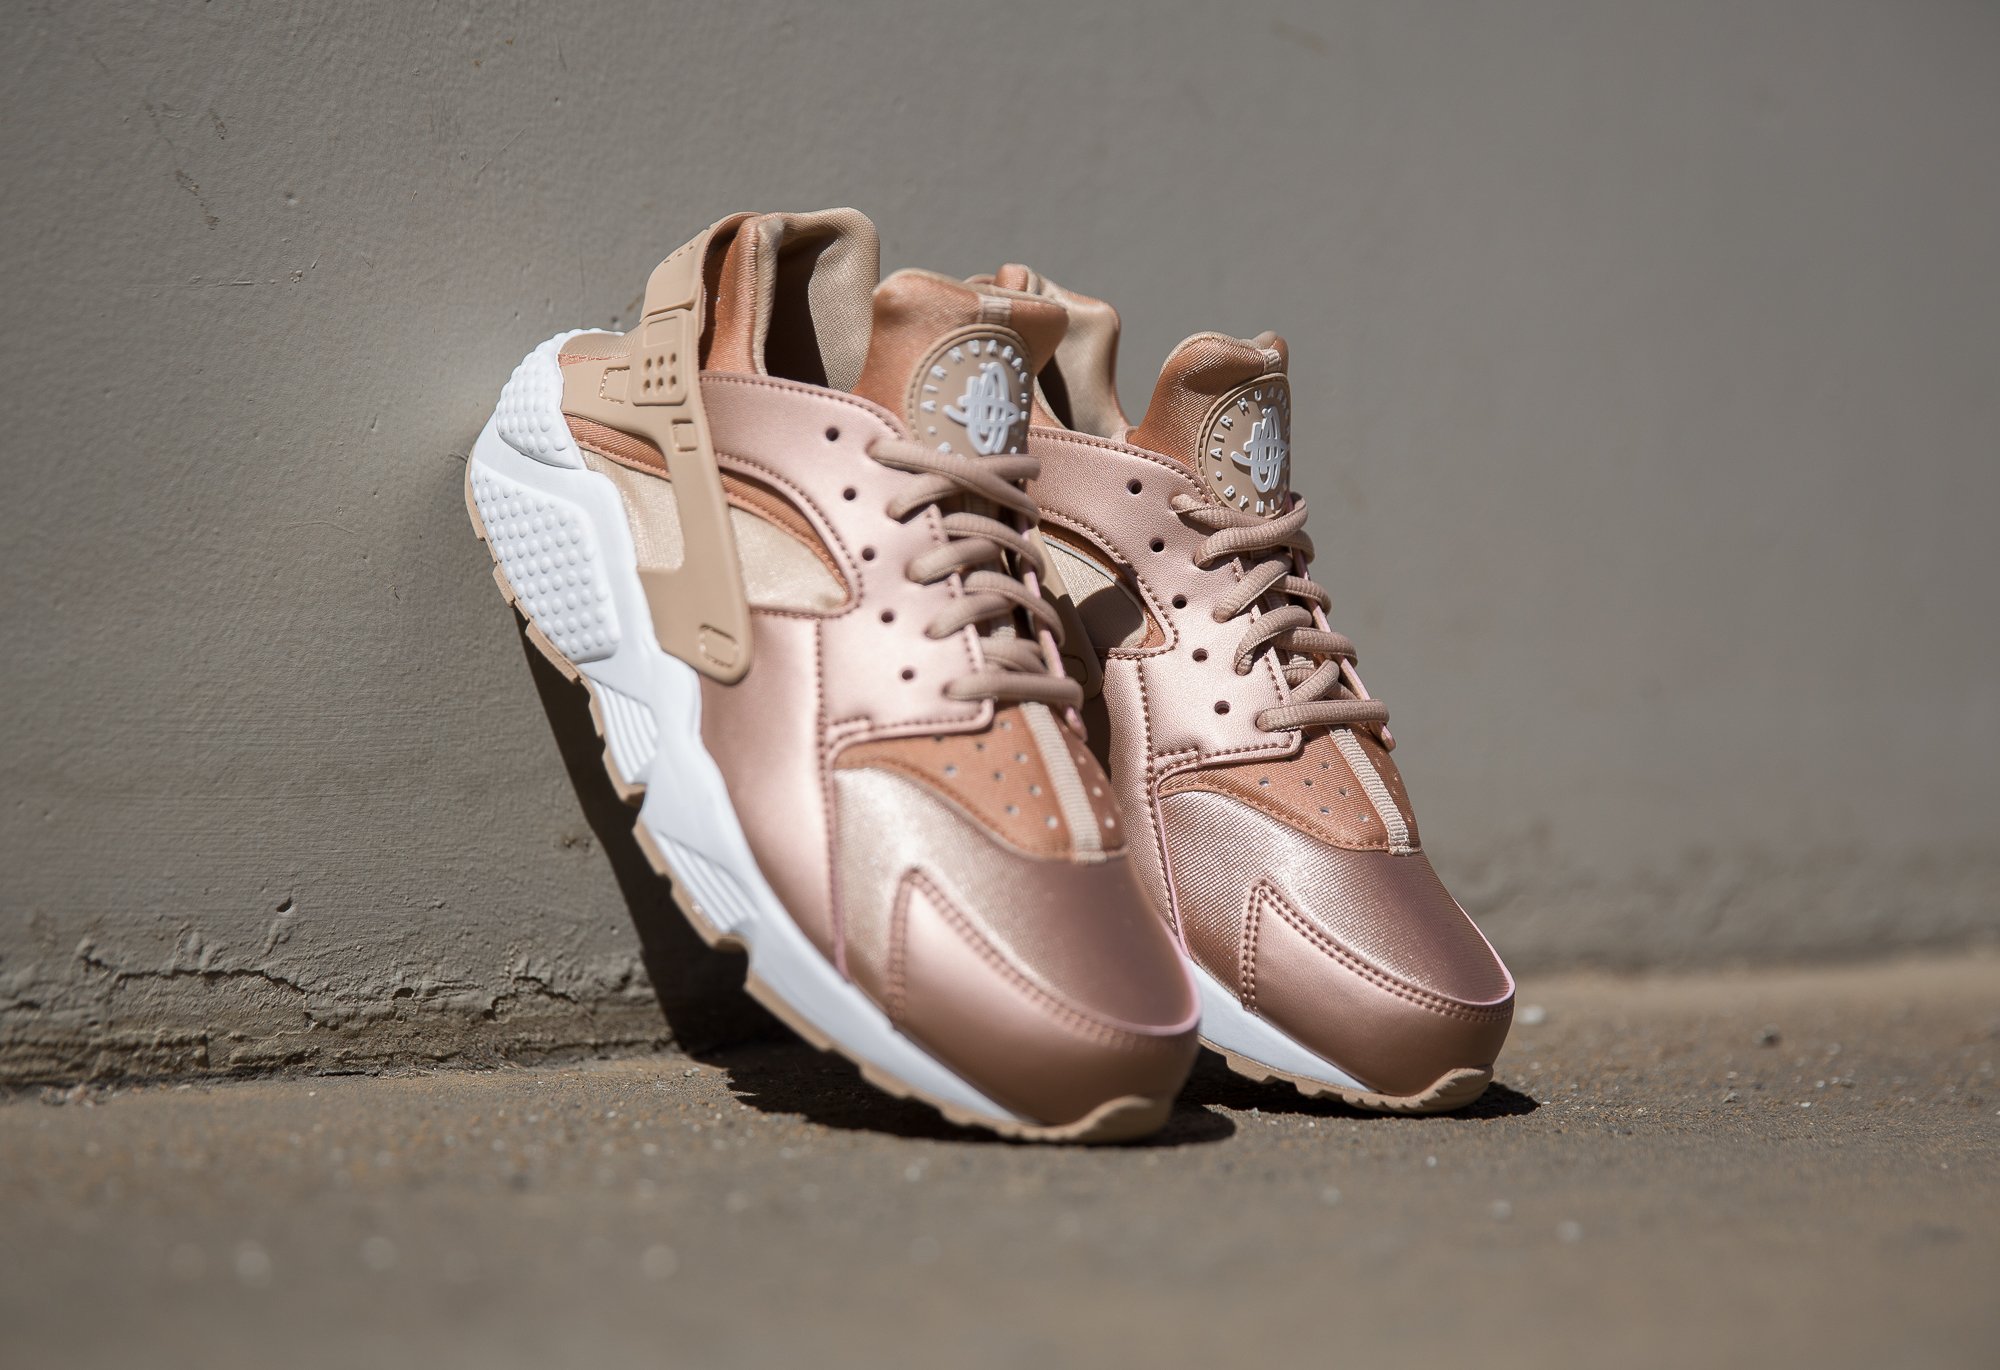 Shiekh.com on Twitter: "This Women's Air Huarache Run SE in Metallic Red Bronze is launching 10/14. ladies feeling these? #WeAreWhatsNext https://t.co/6CgN7PwW7v" / Twitter